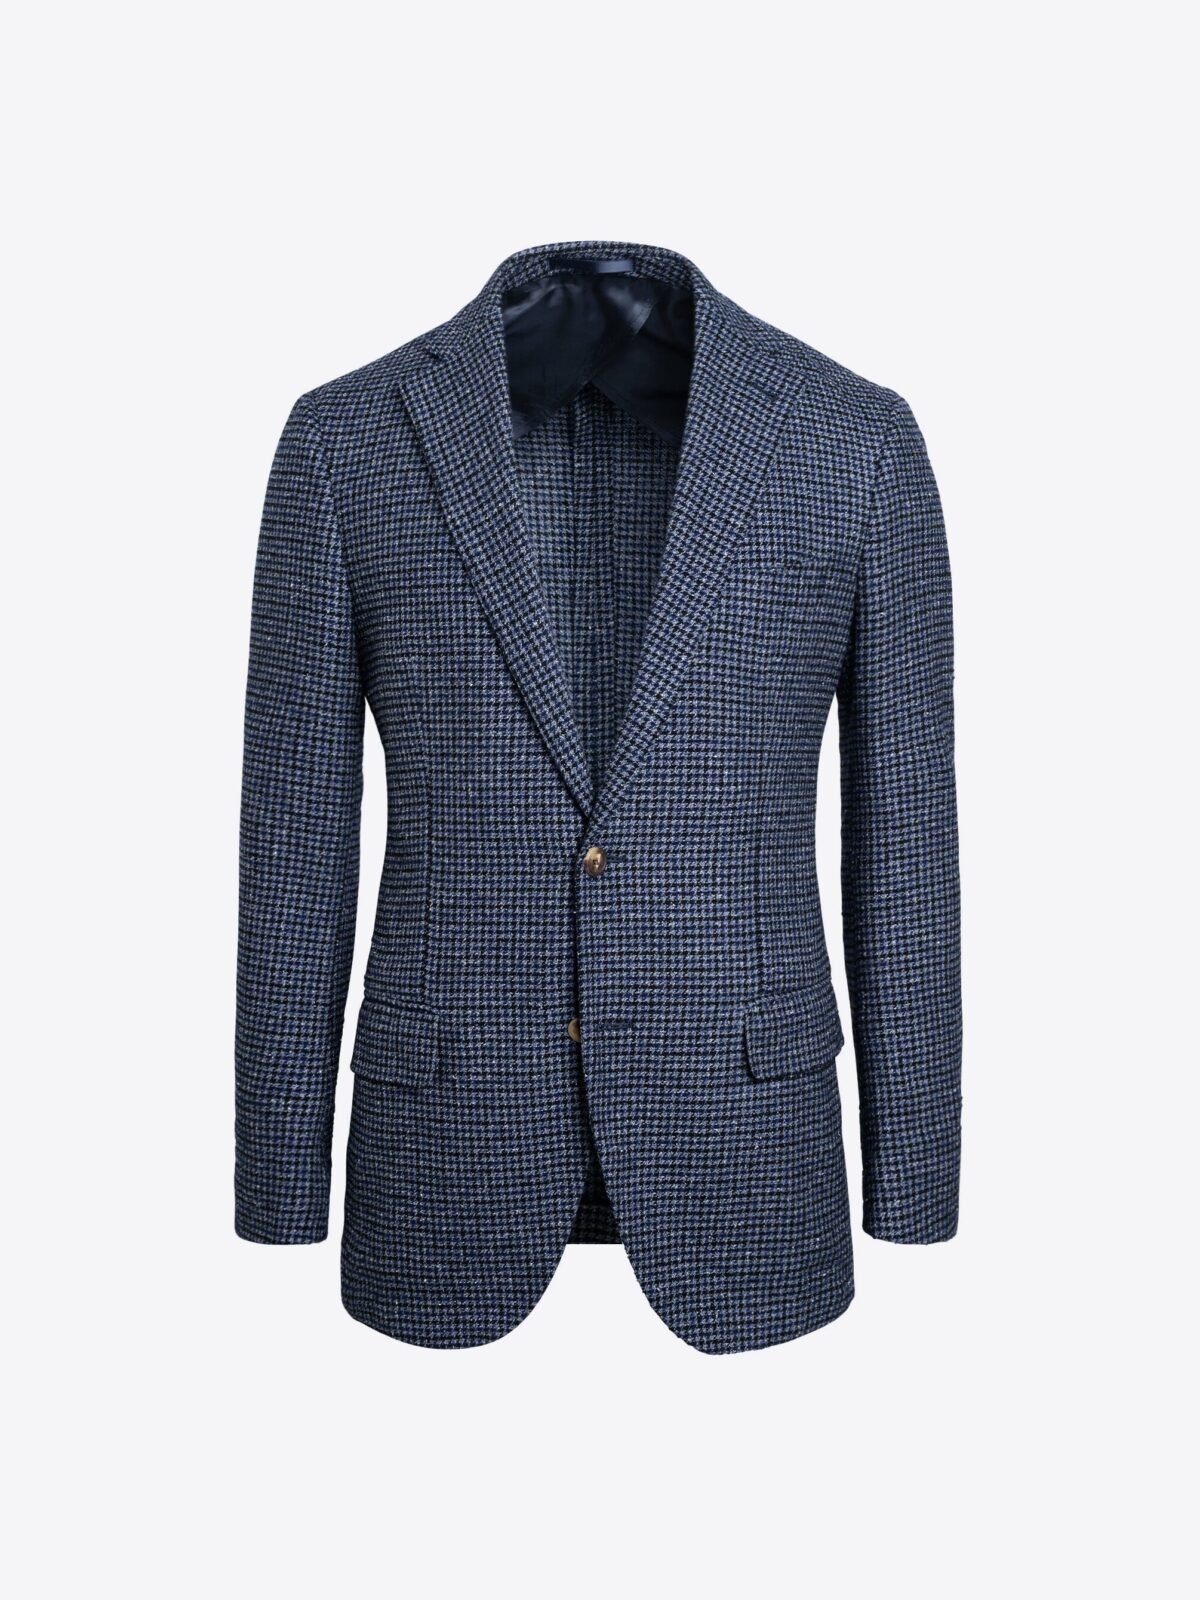 Di Fabio Slate Houndstooth Wool Cashmere Bedford Jacket